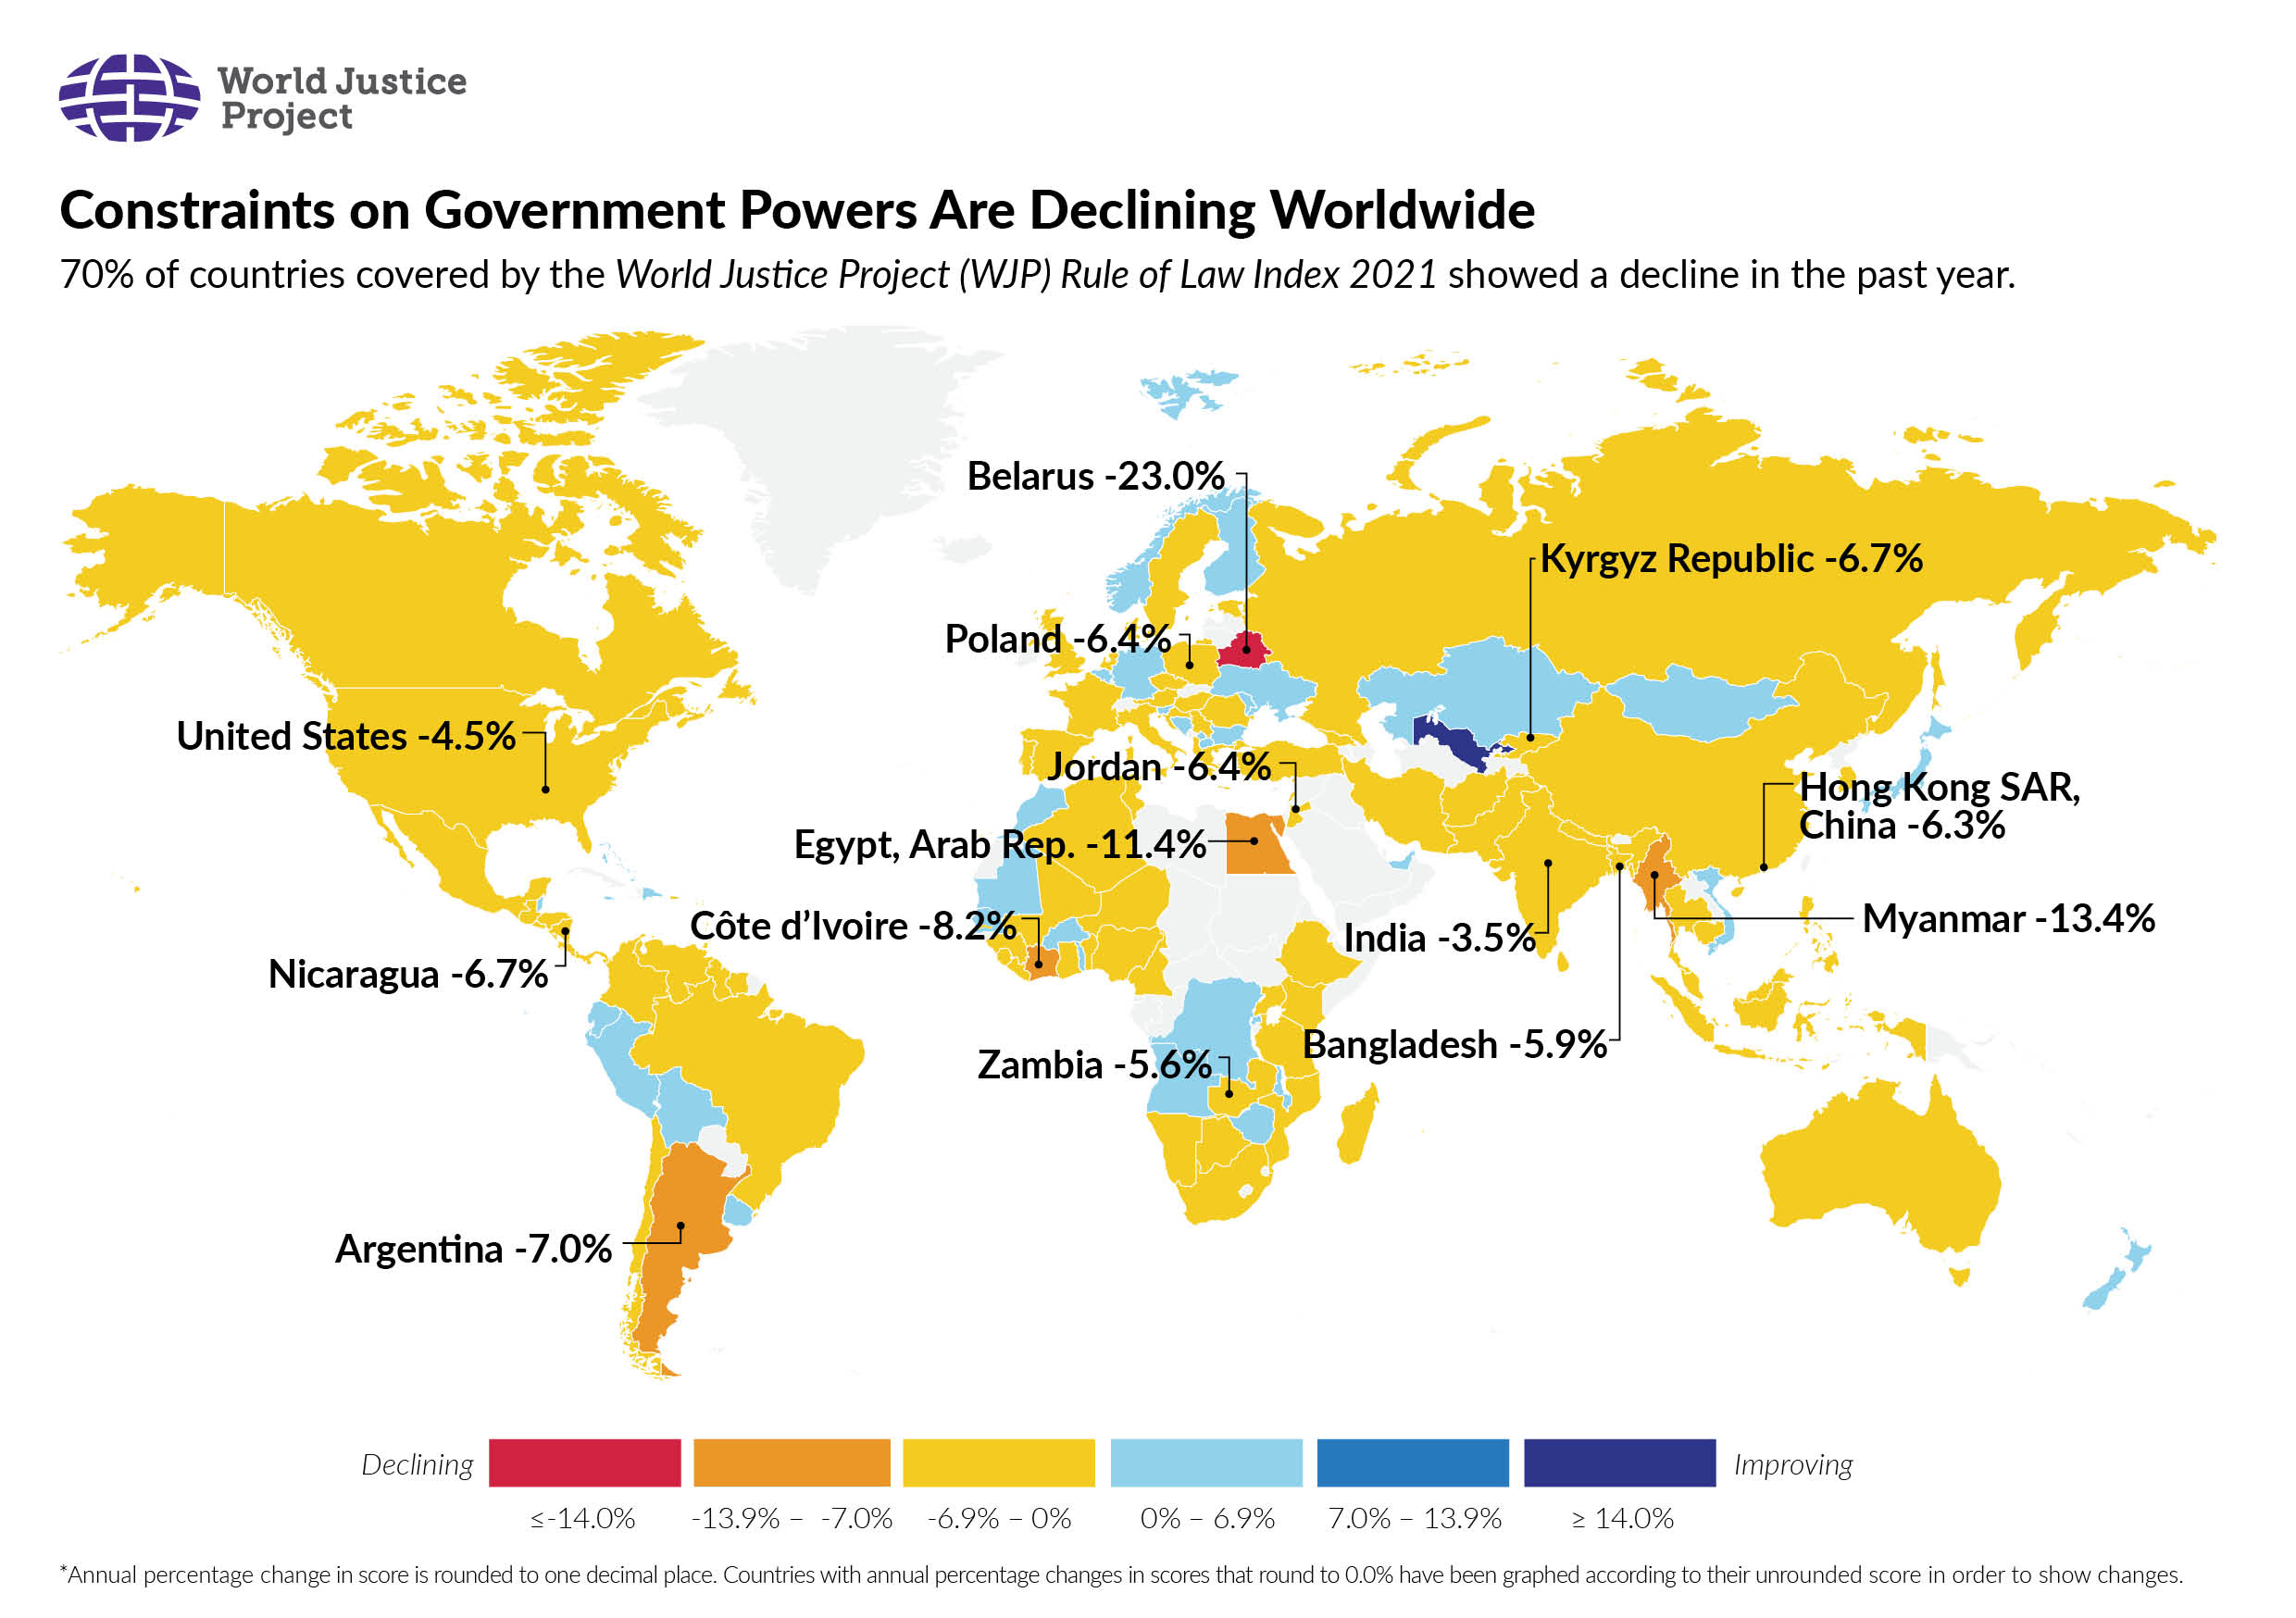 Constraints on Government Powers - WJP Rule of Law Index 2021